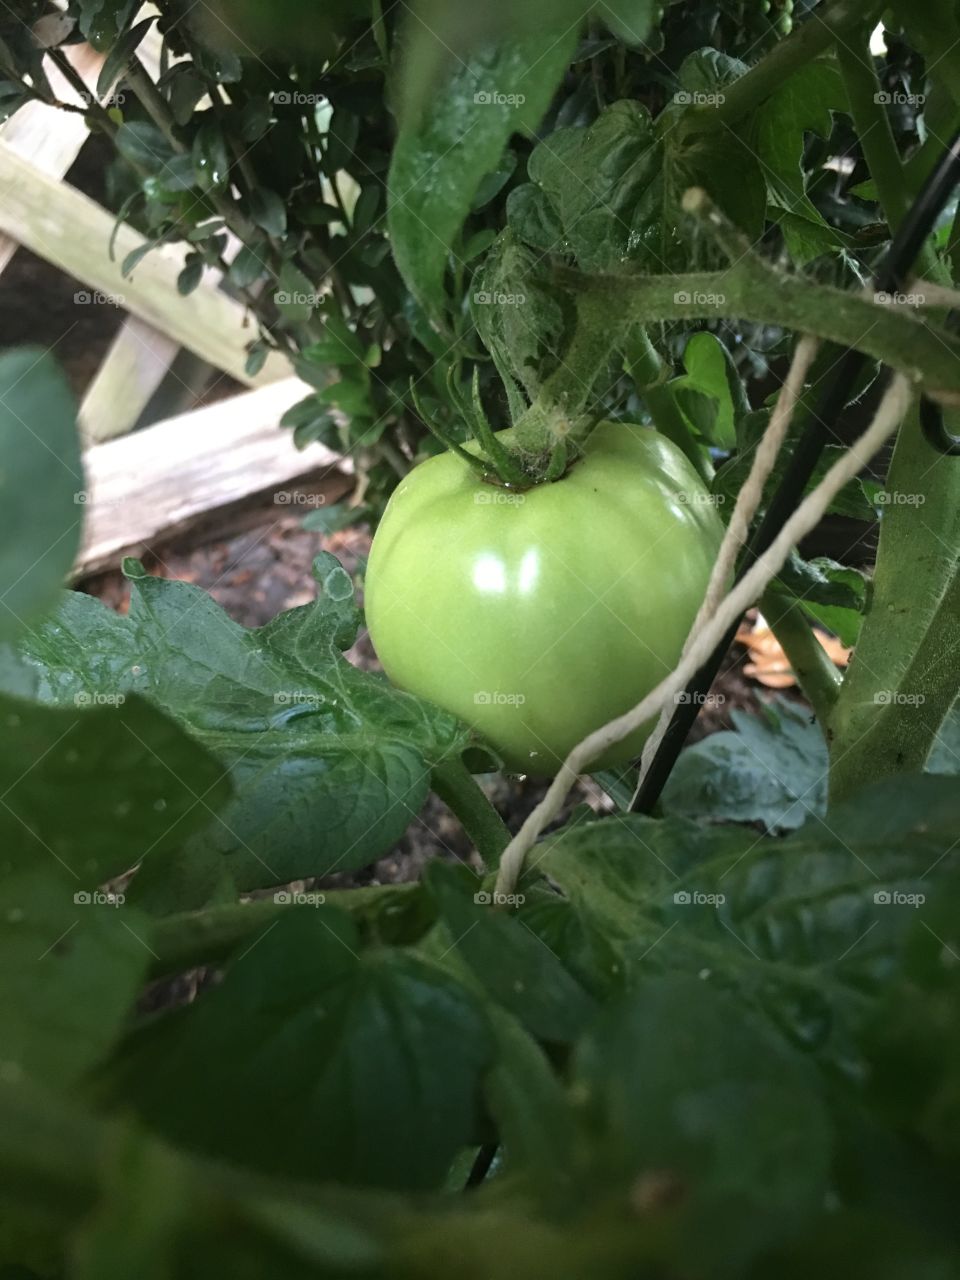 Ready for some fried green tomatoes organically grown